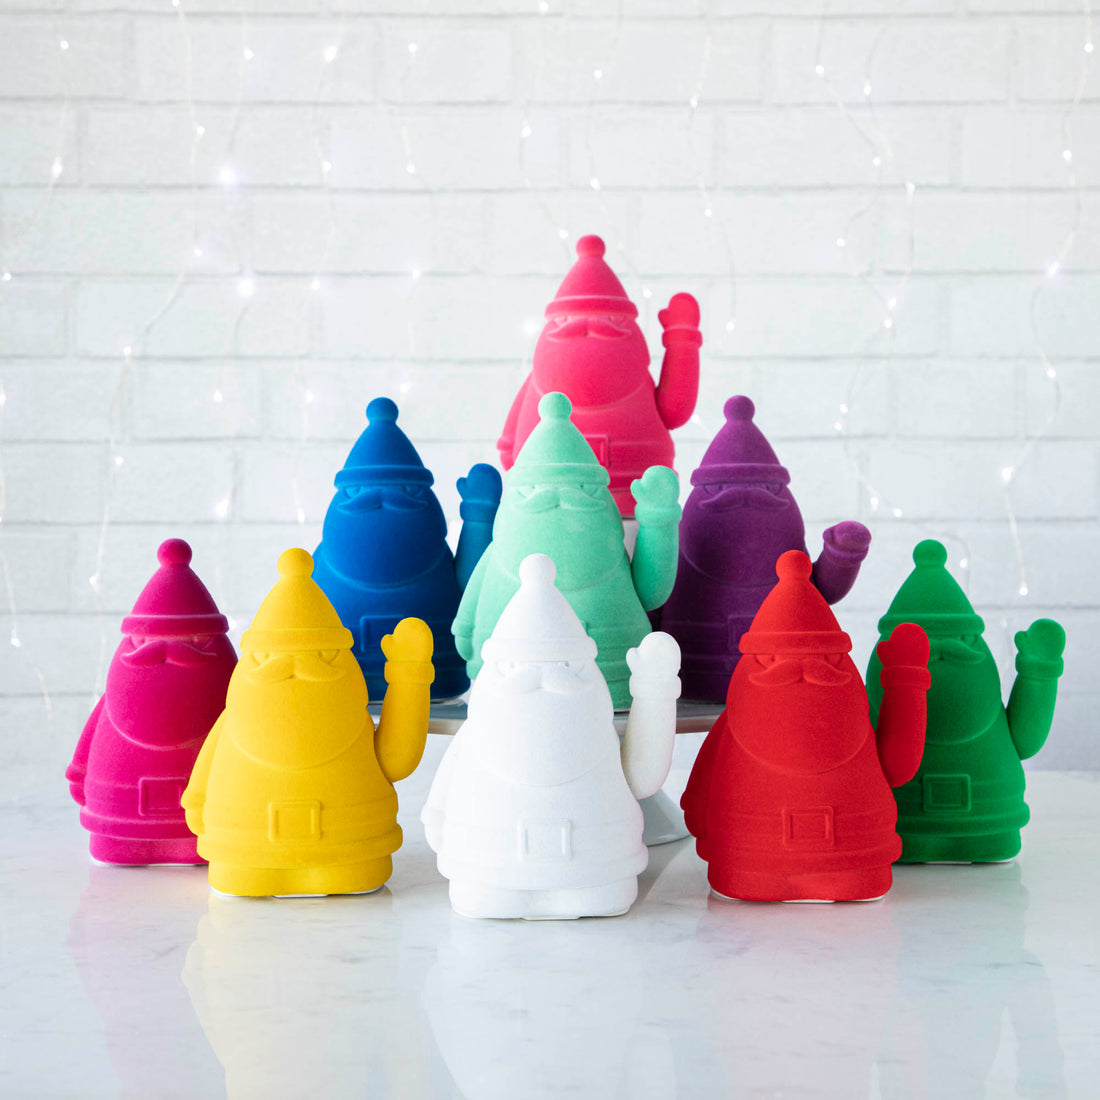 A group of colorful, Glitterville Waving Flocked Santa figurines on a table.